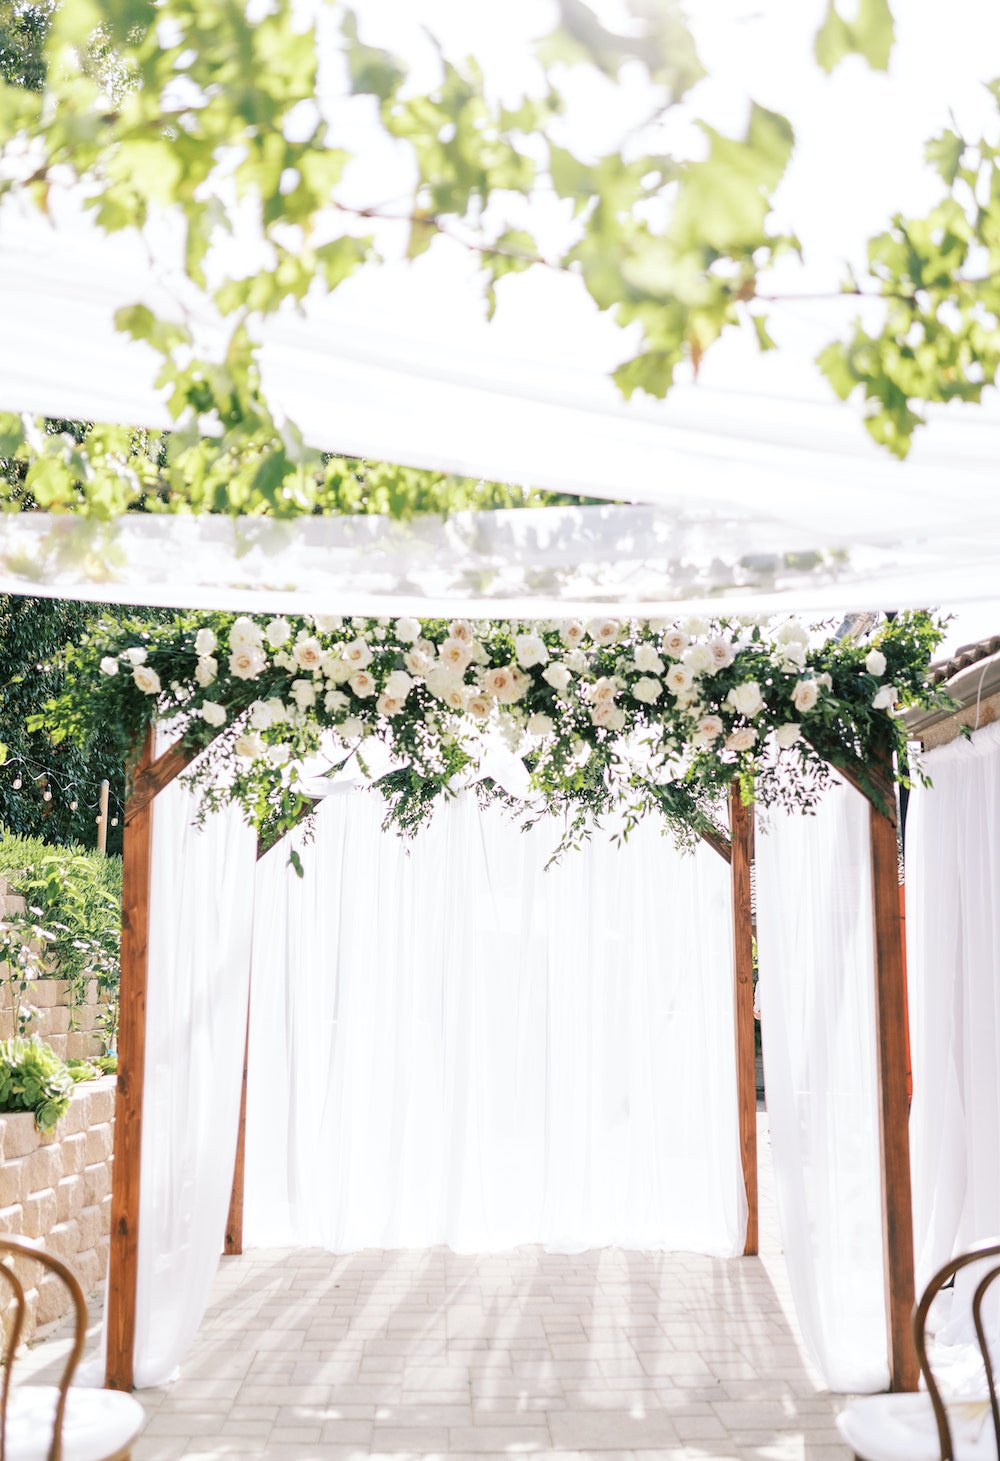 Backyard wedding ceremony chuppah arch with draping and flowers.